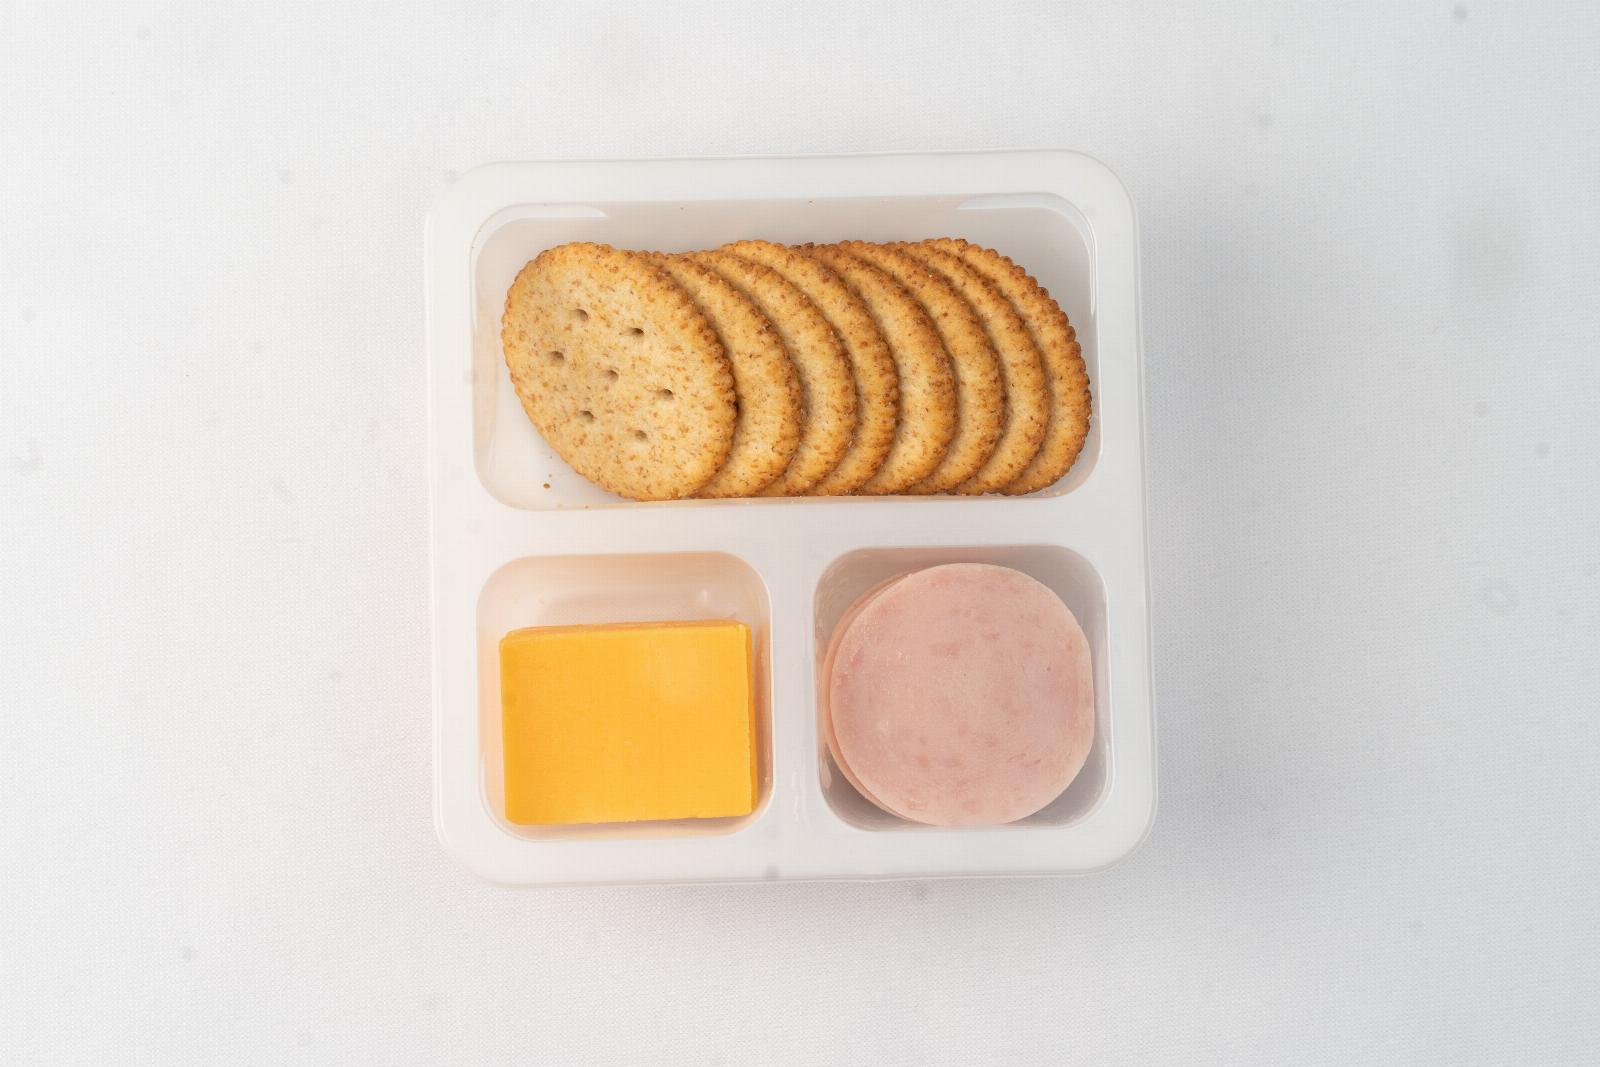 Lunchables Aren’t Healthy. But the Lead in Them Isn’t the Problem.